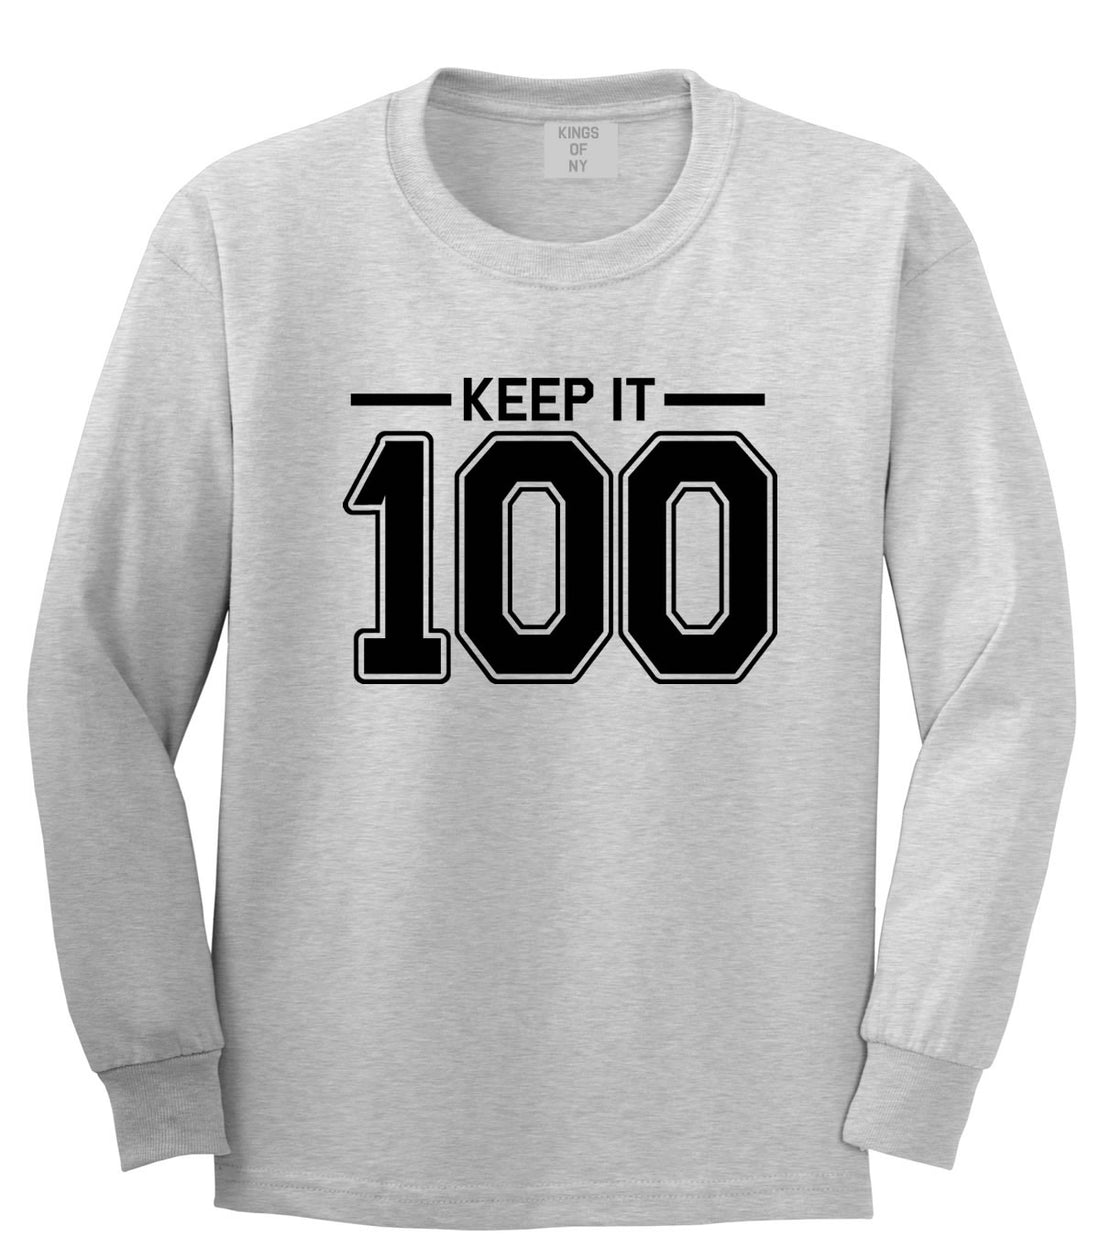 Keep It 100 Long Sleeve T-Shirt in Grey by Kings Of NY